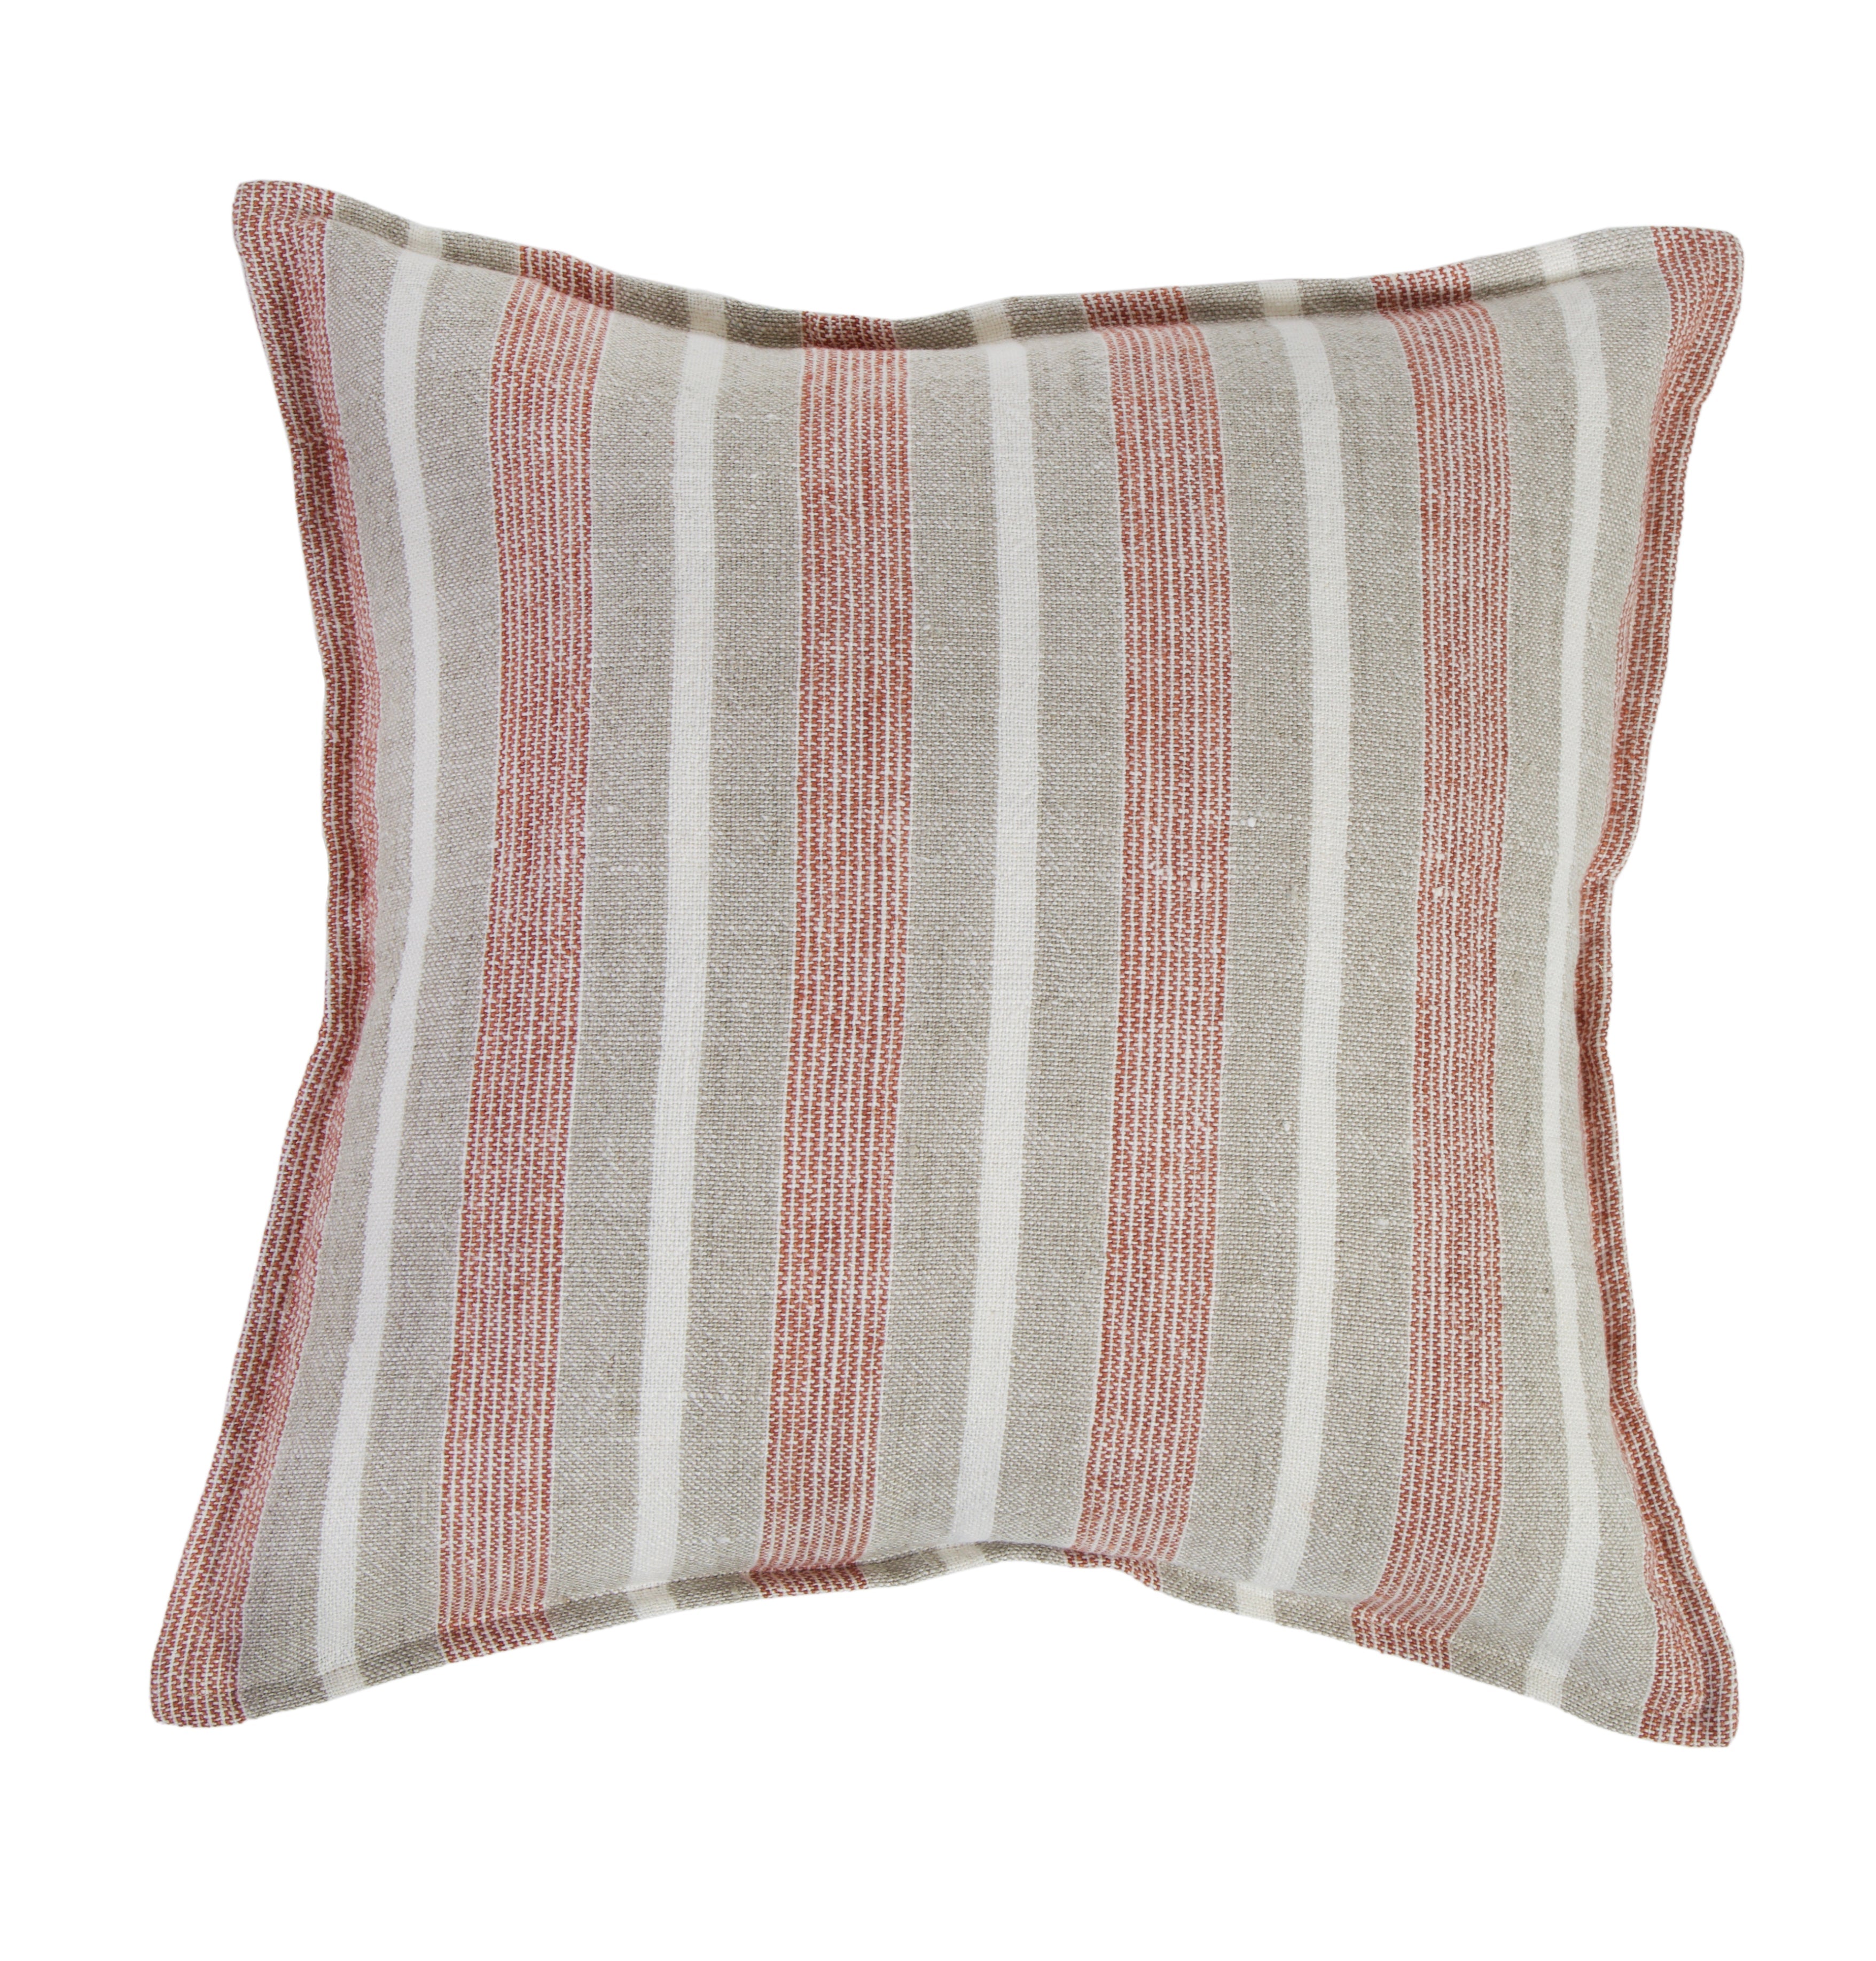 Montecito Pillow 20"x 20" with Insert - pom pom at home